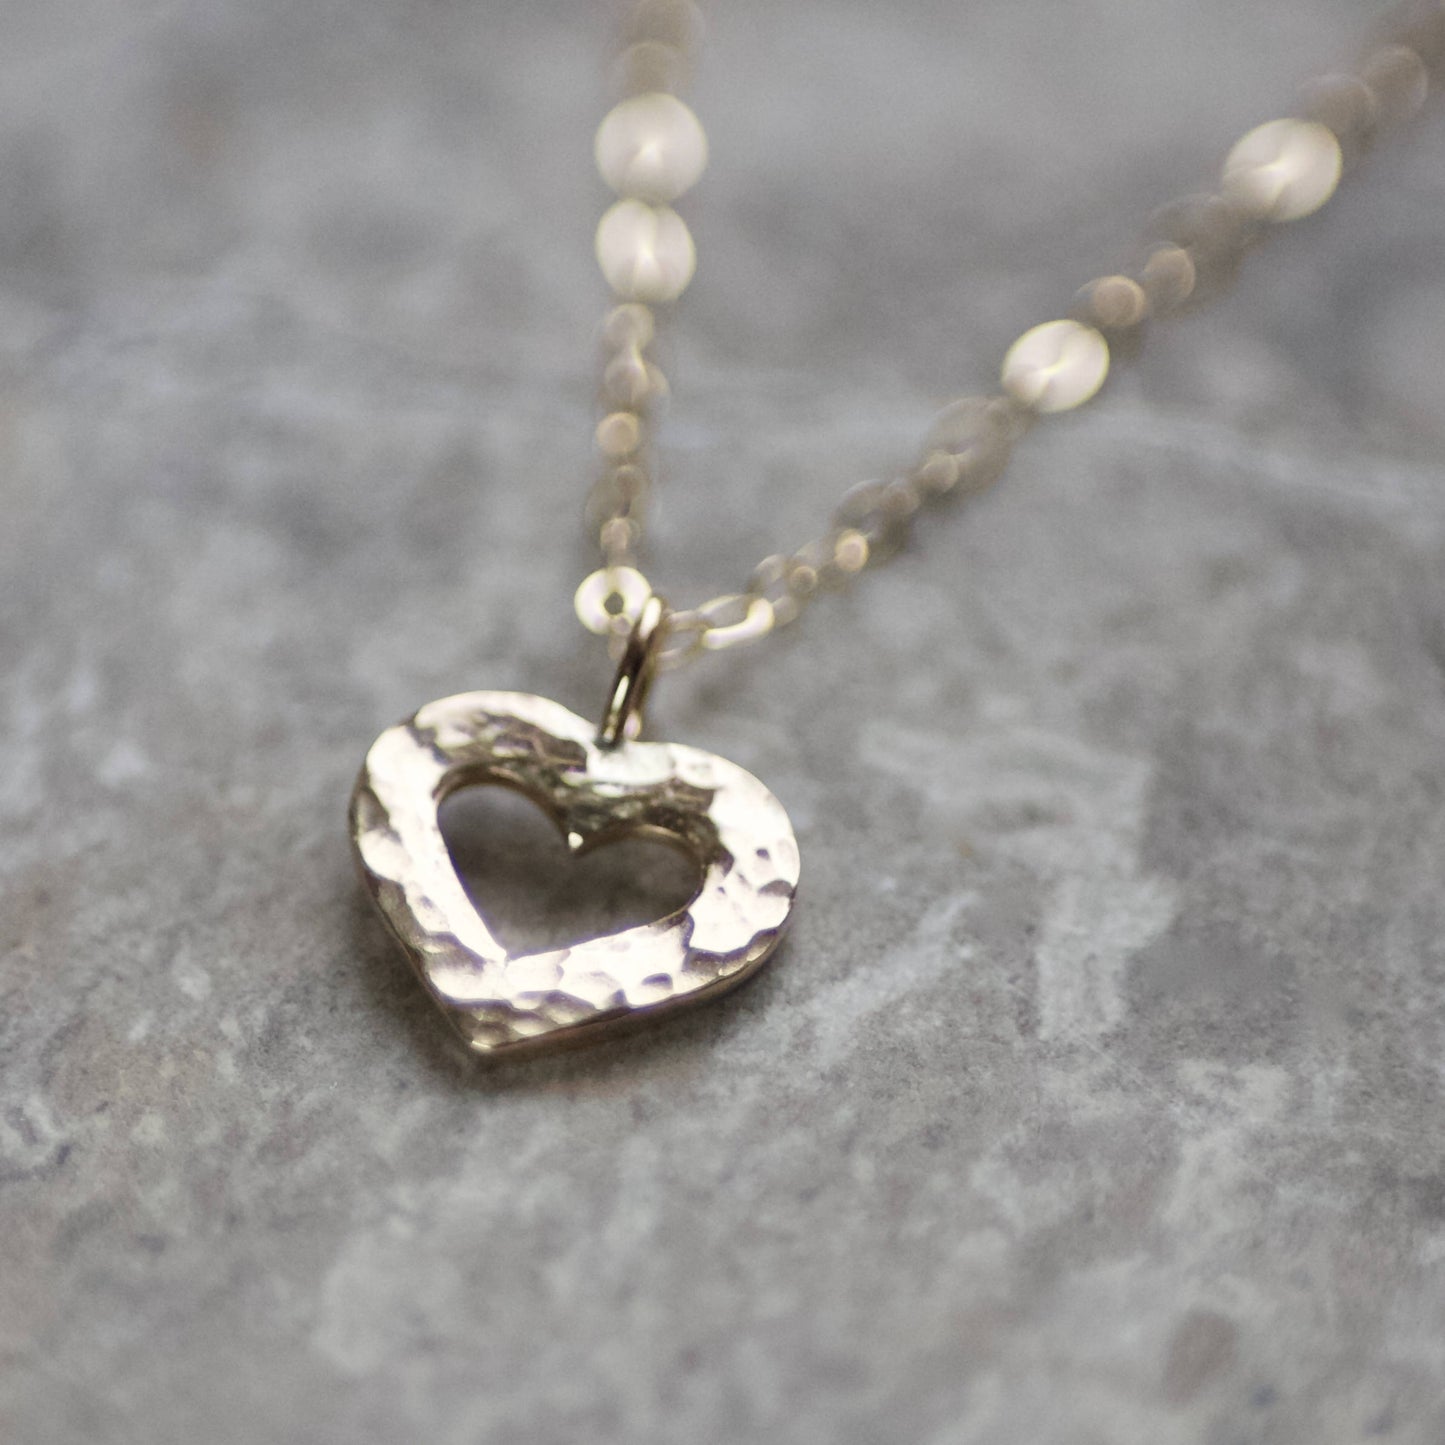 Solid 9ct Recycled Gold Open Heart Pendant Necklace